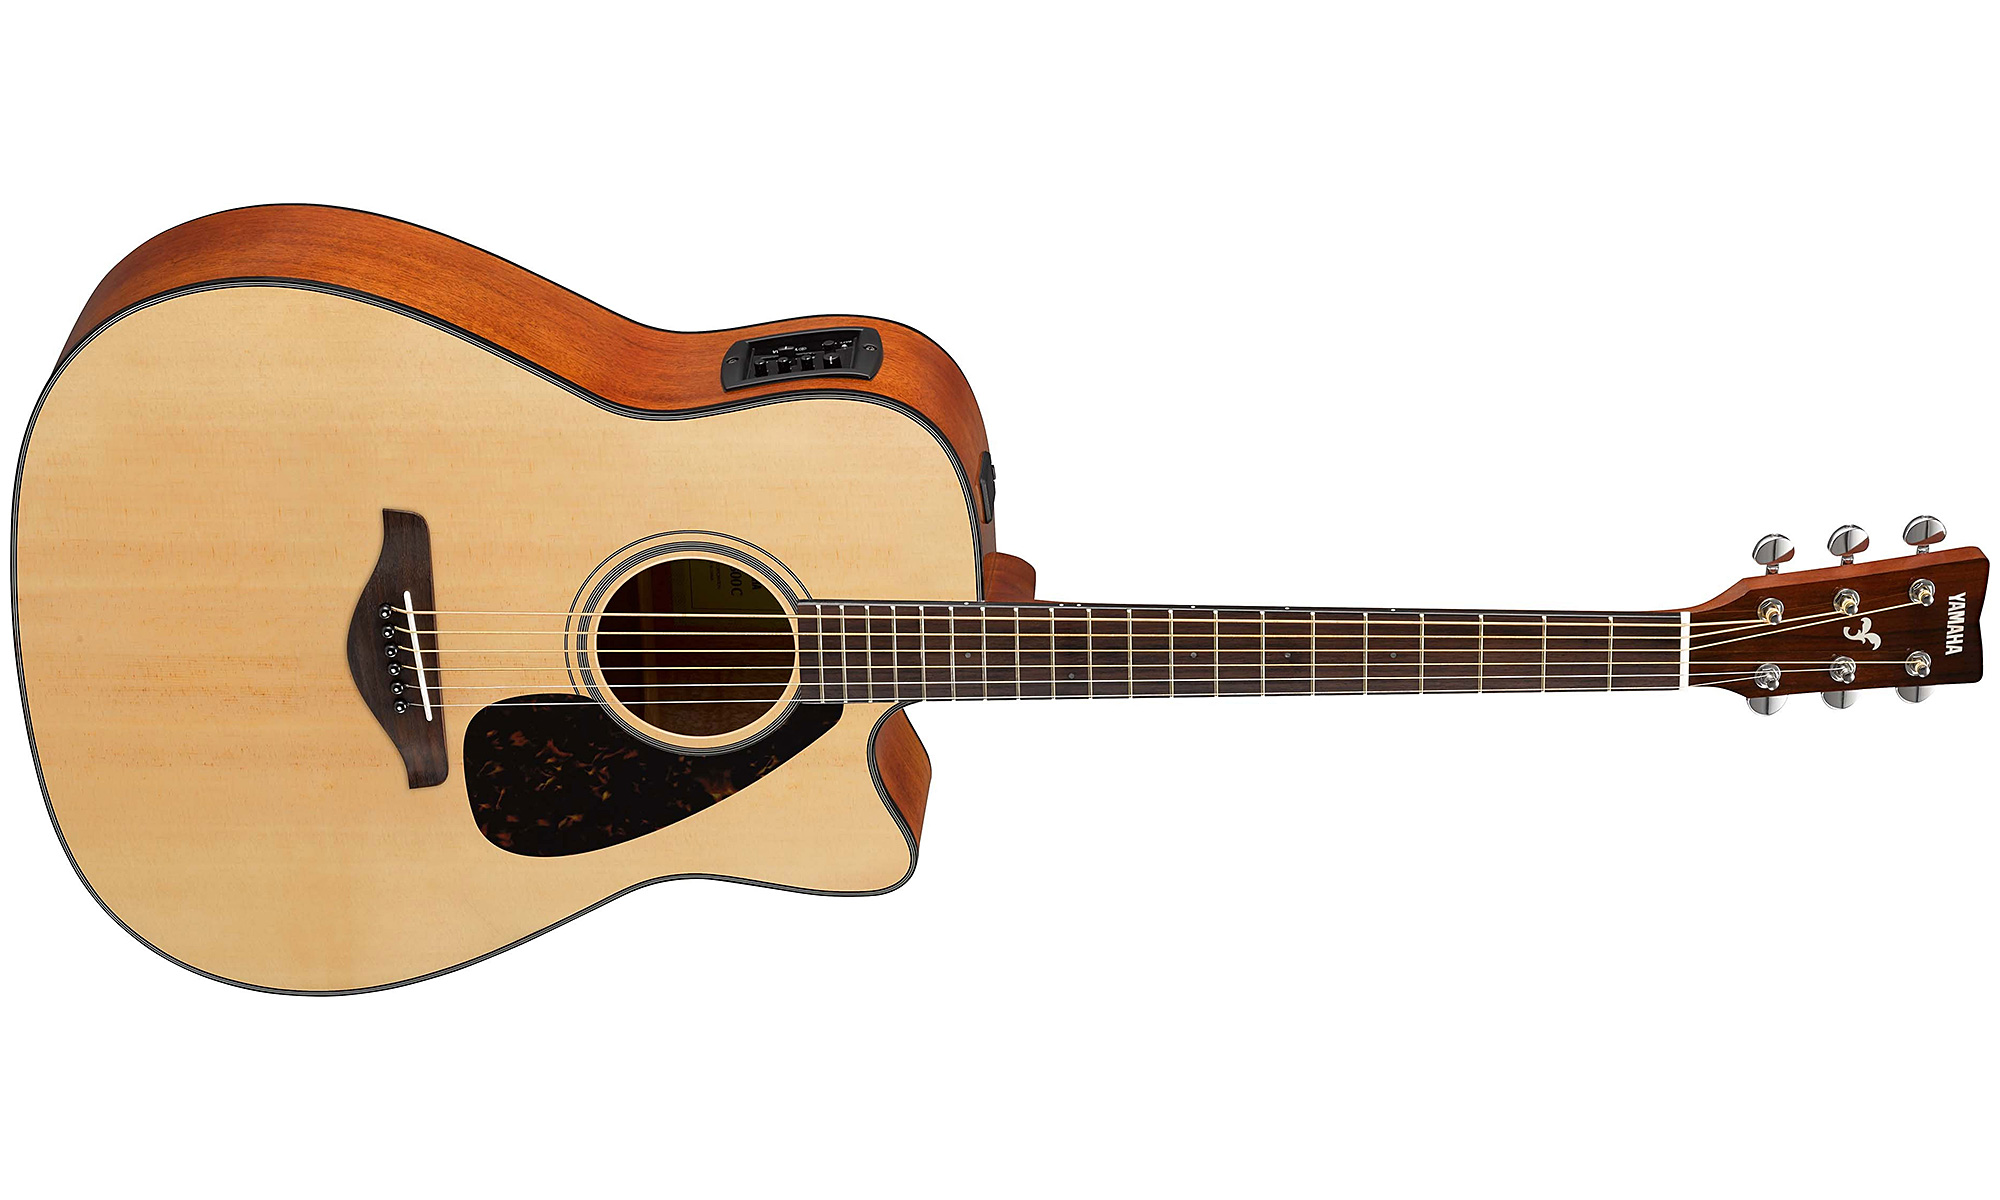 Yamaha Fgx800c Nt Dreadnought Cw Epicea Nato 2016 - Natural - Electro acoustic guitar - Variation 1